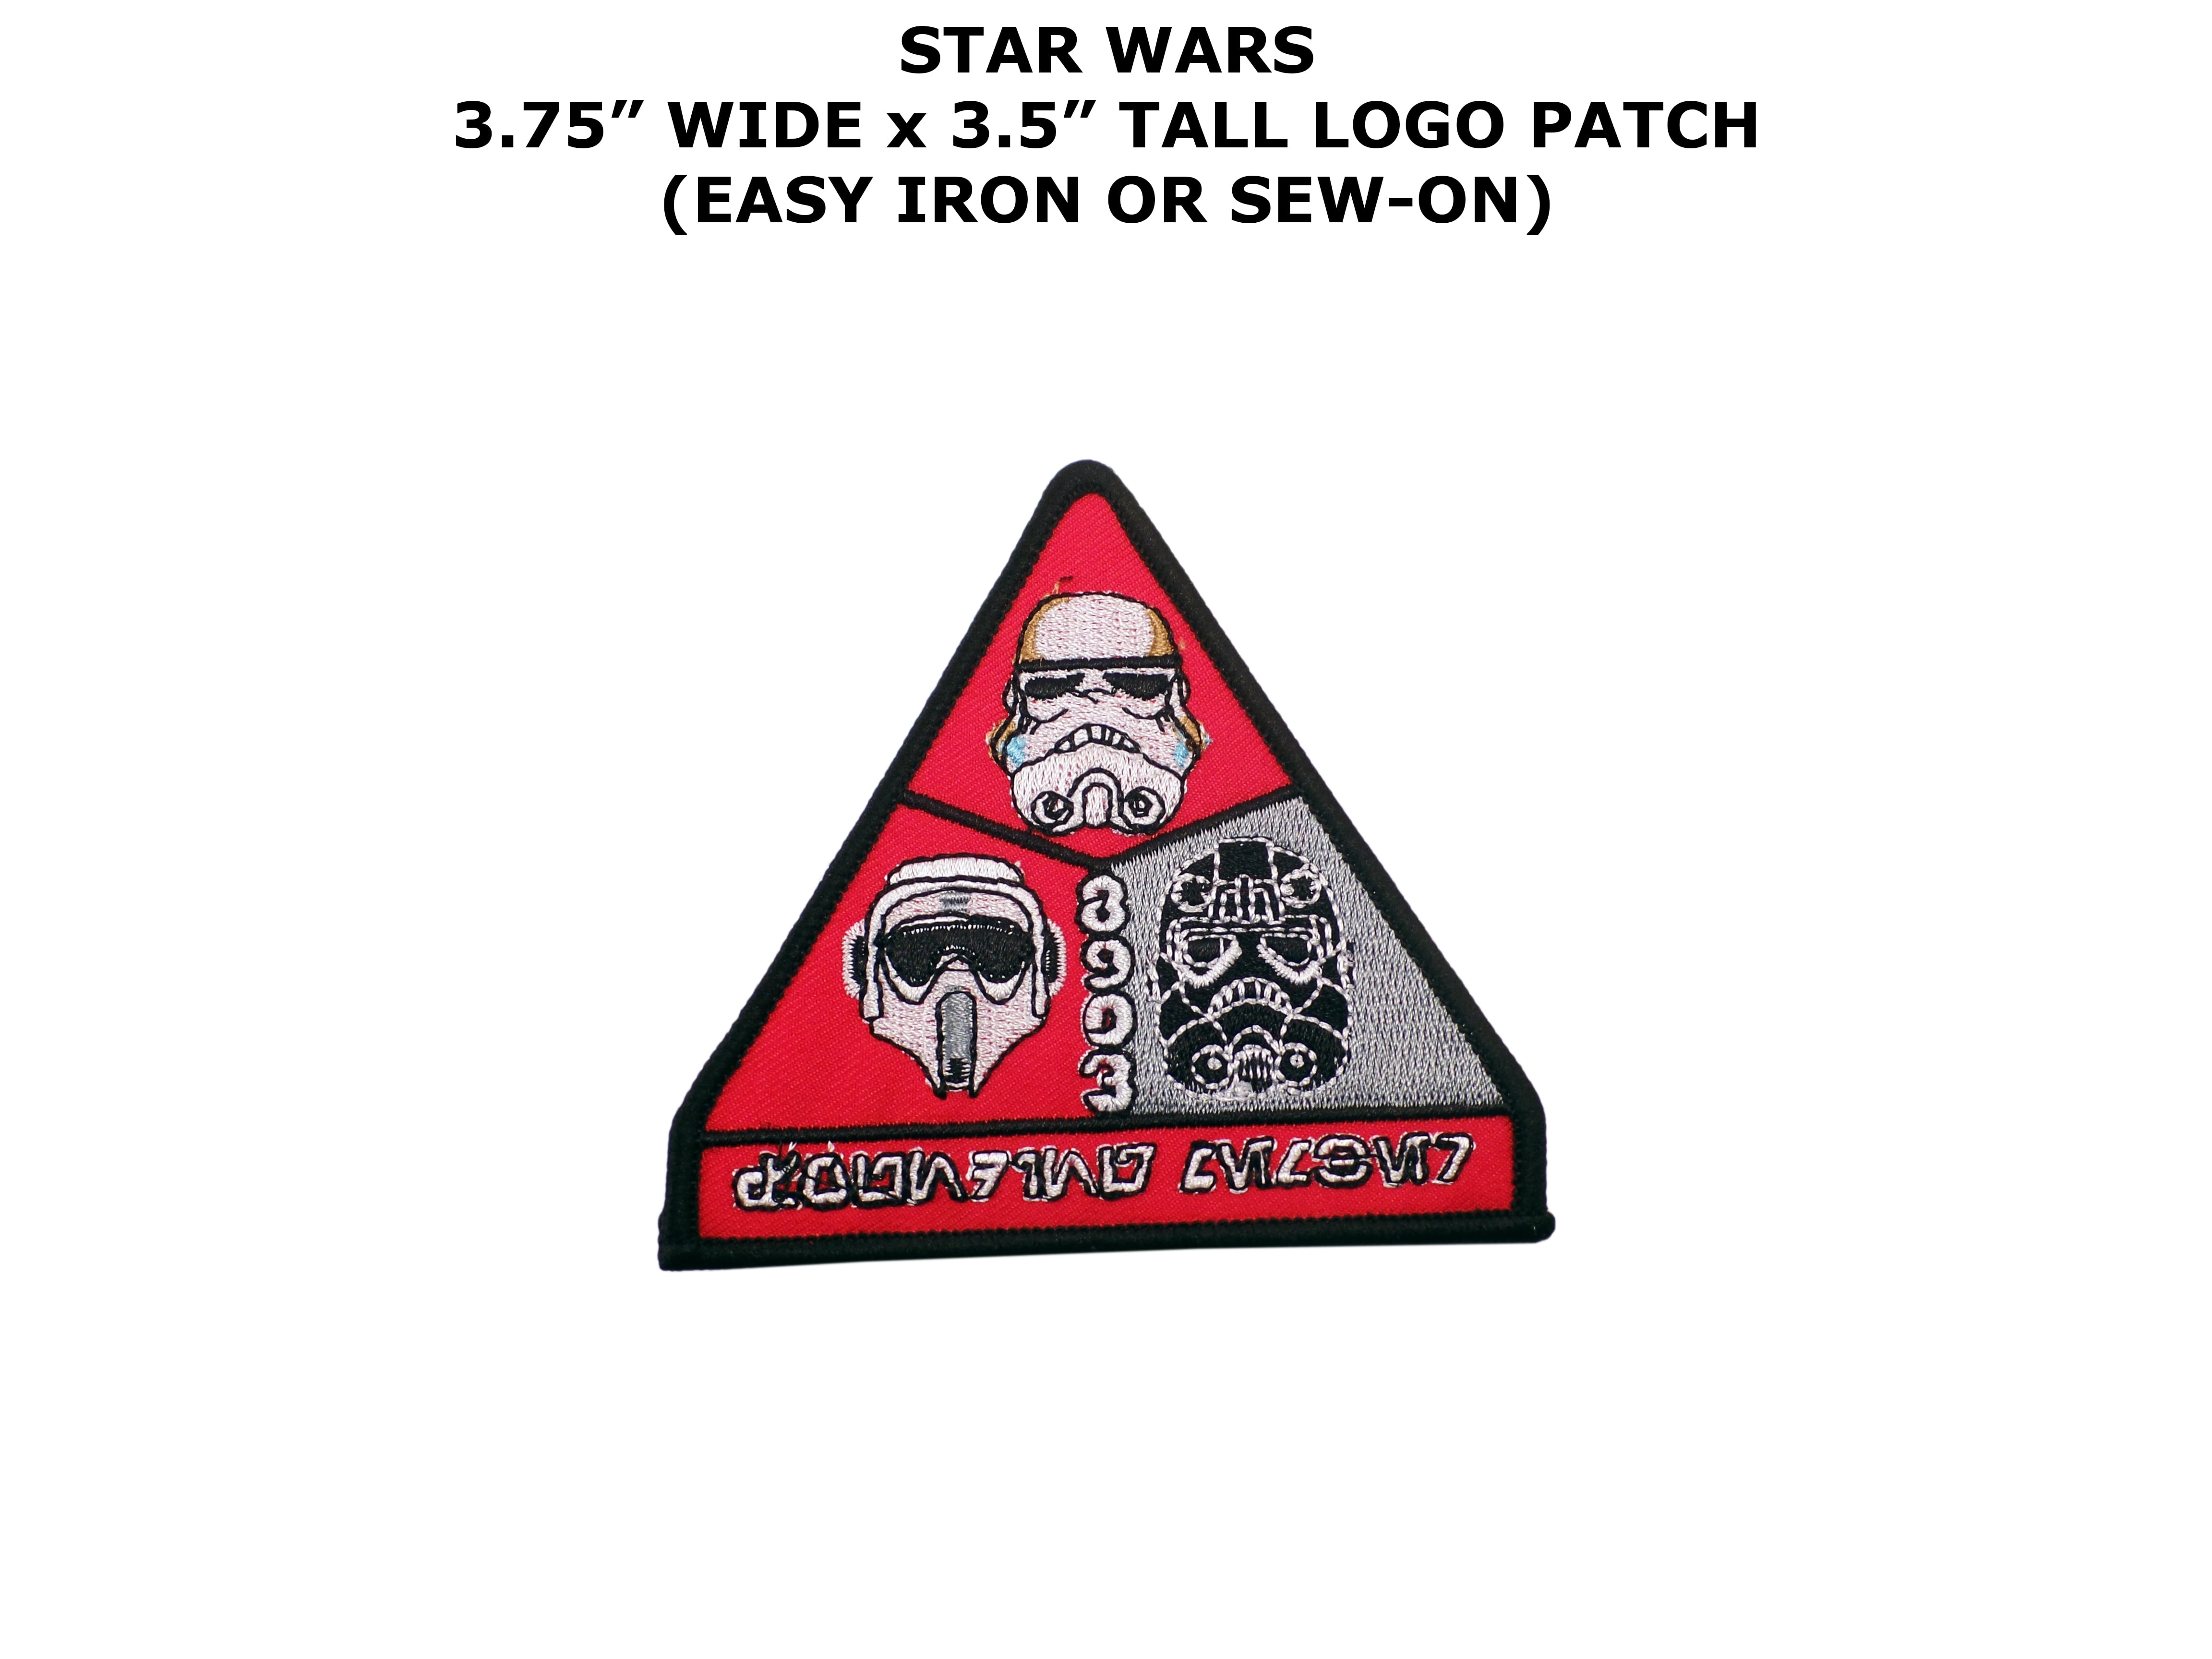 Star Wars inspired Unit Patches : r/army